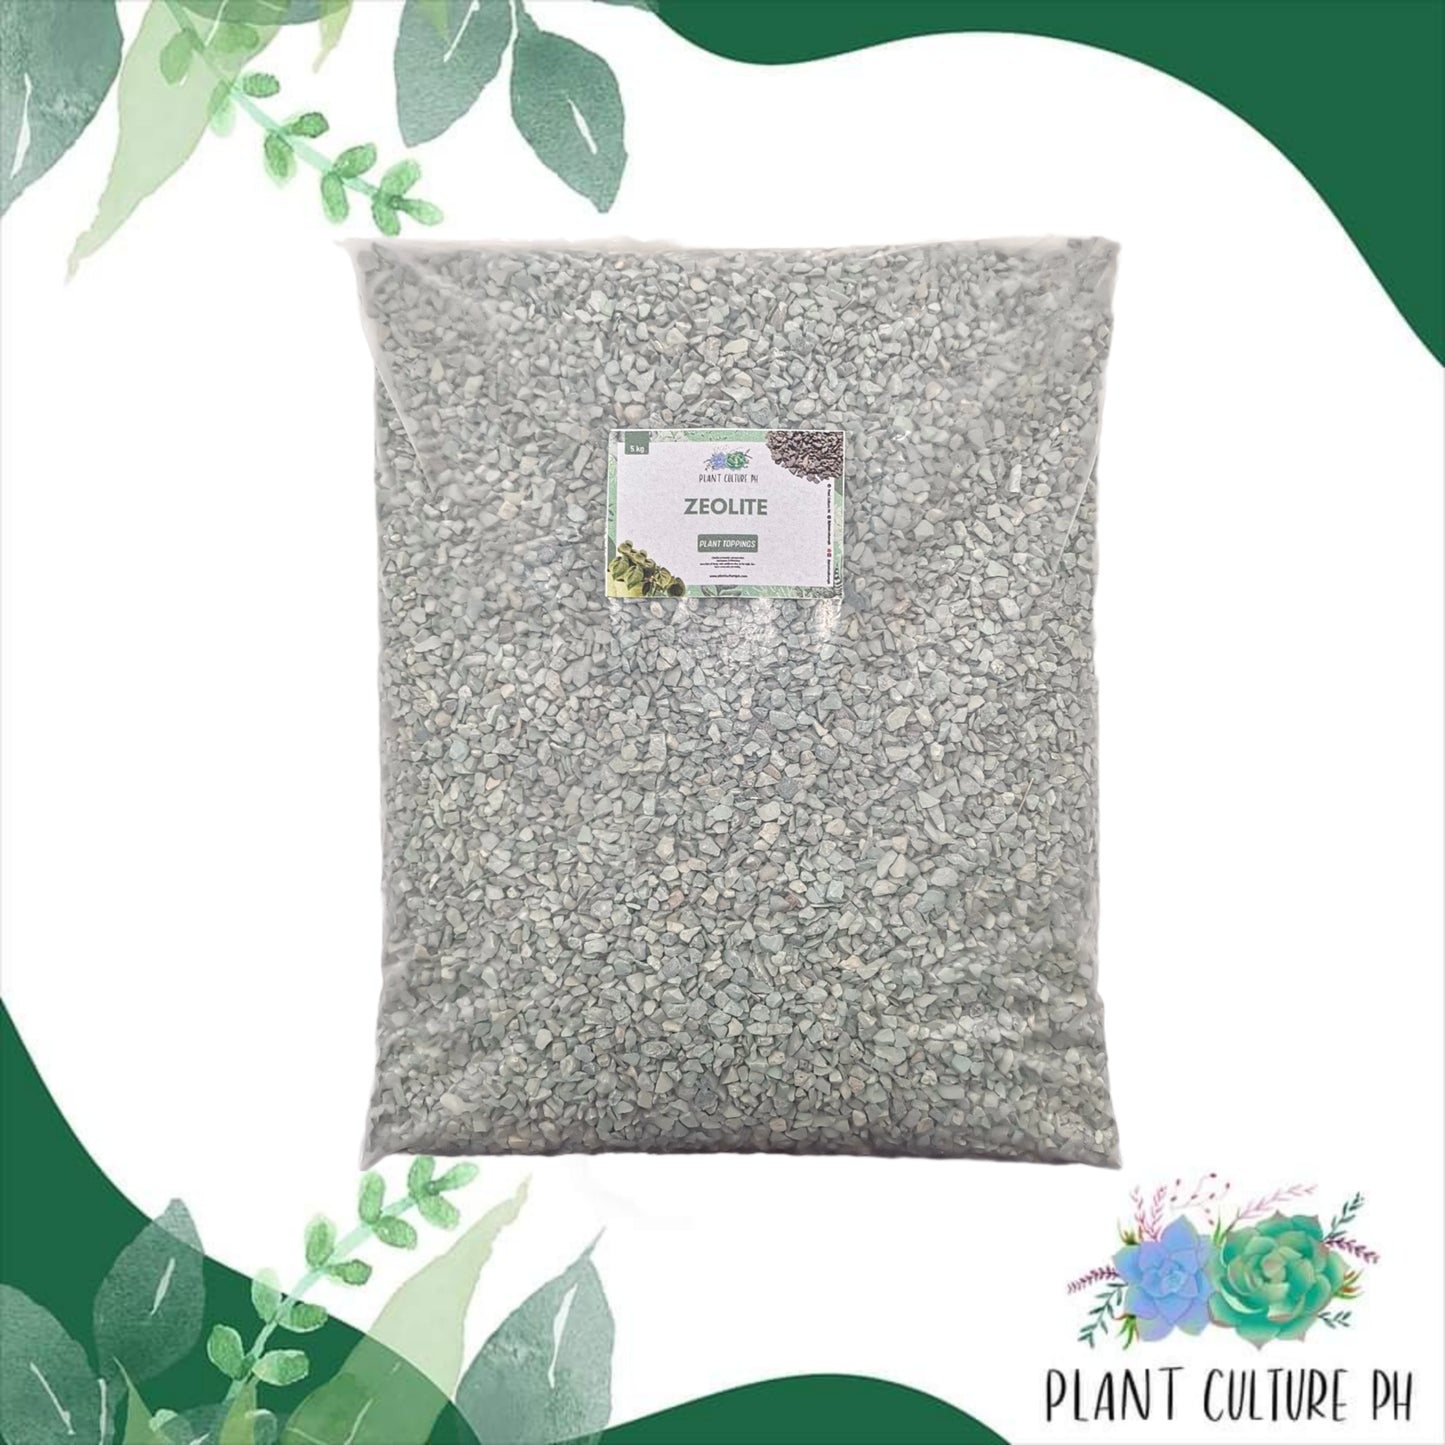 Zeolite by Plant Culture PH